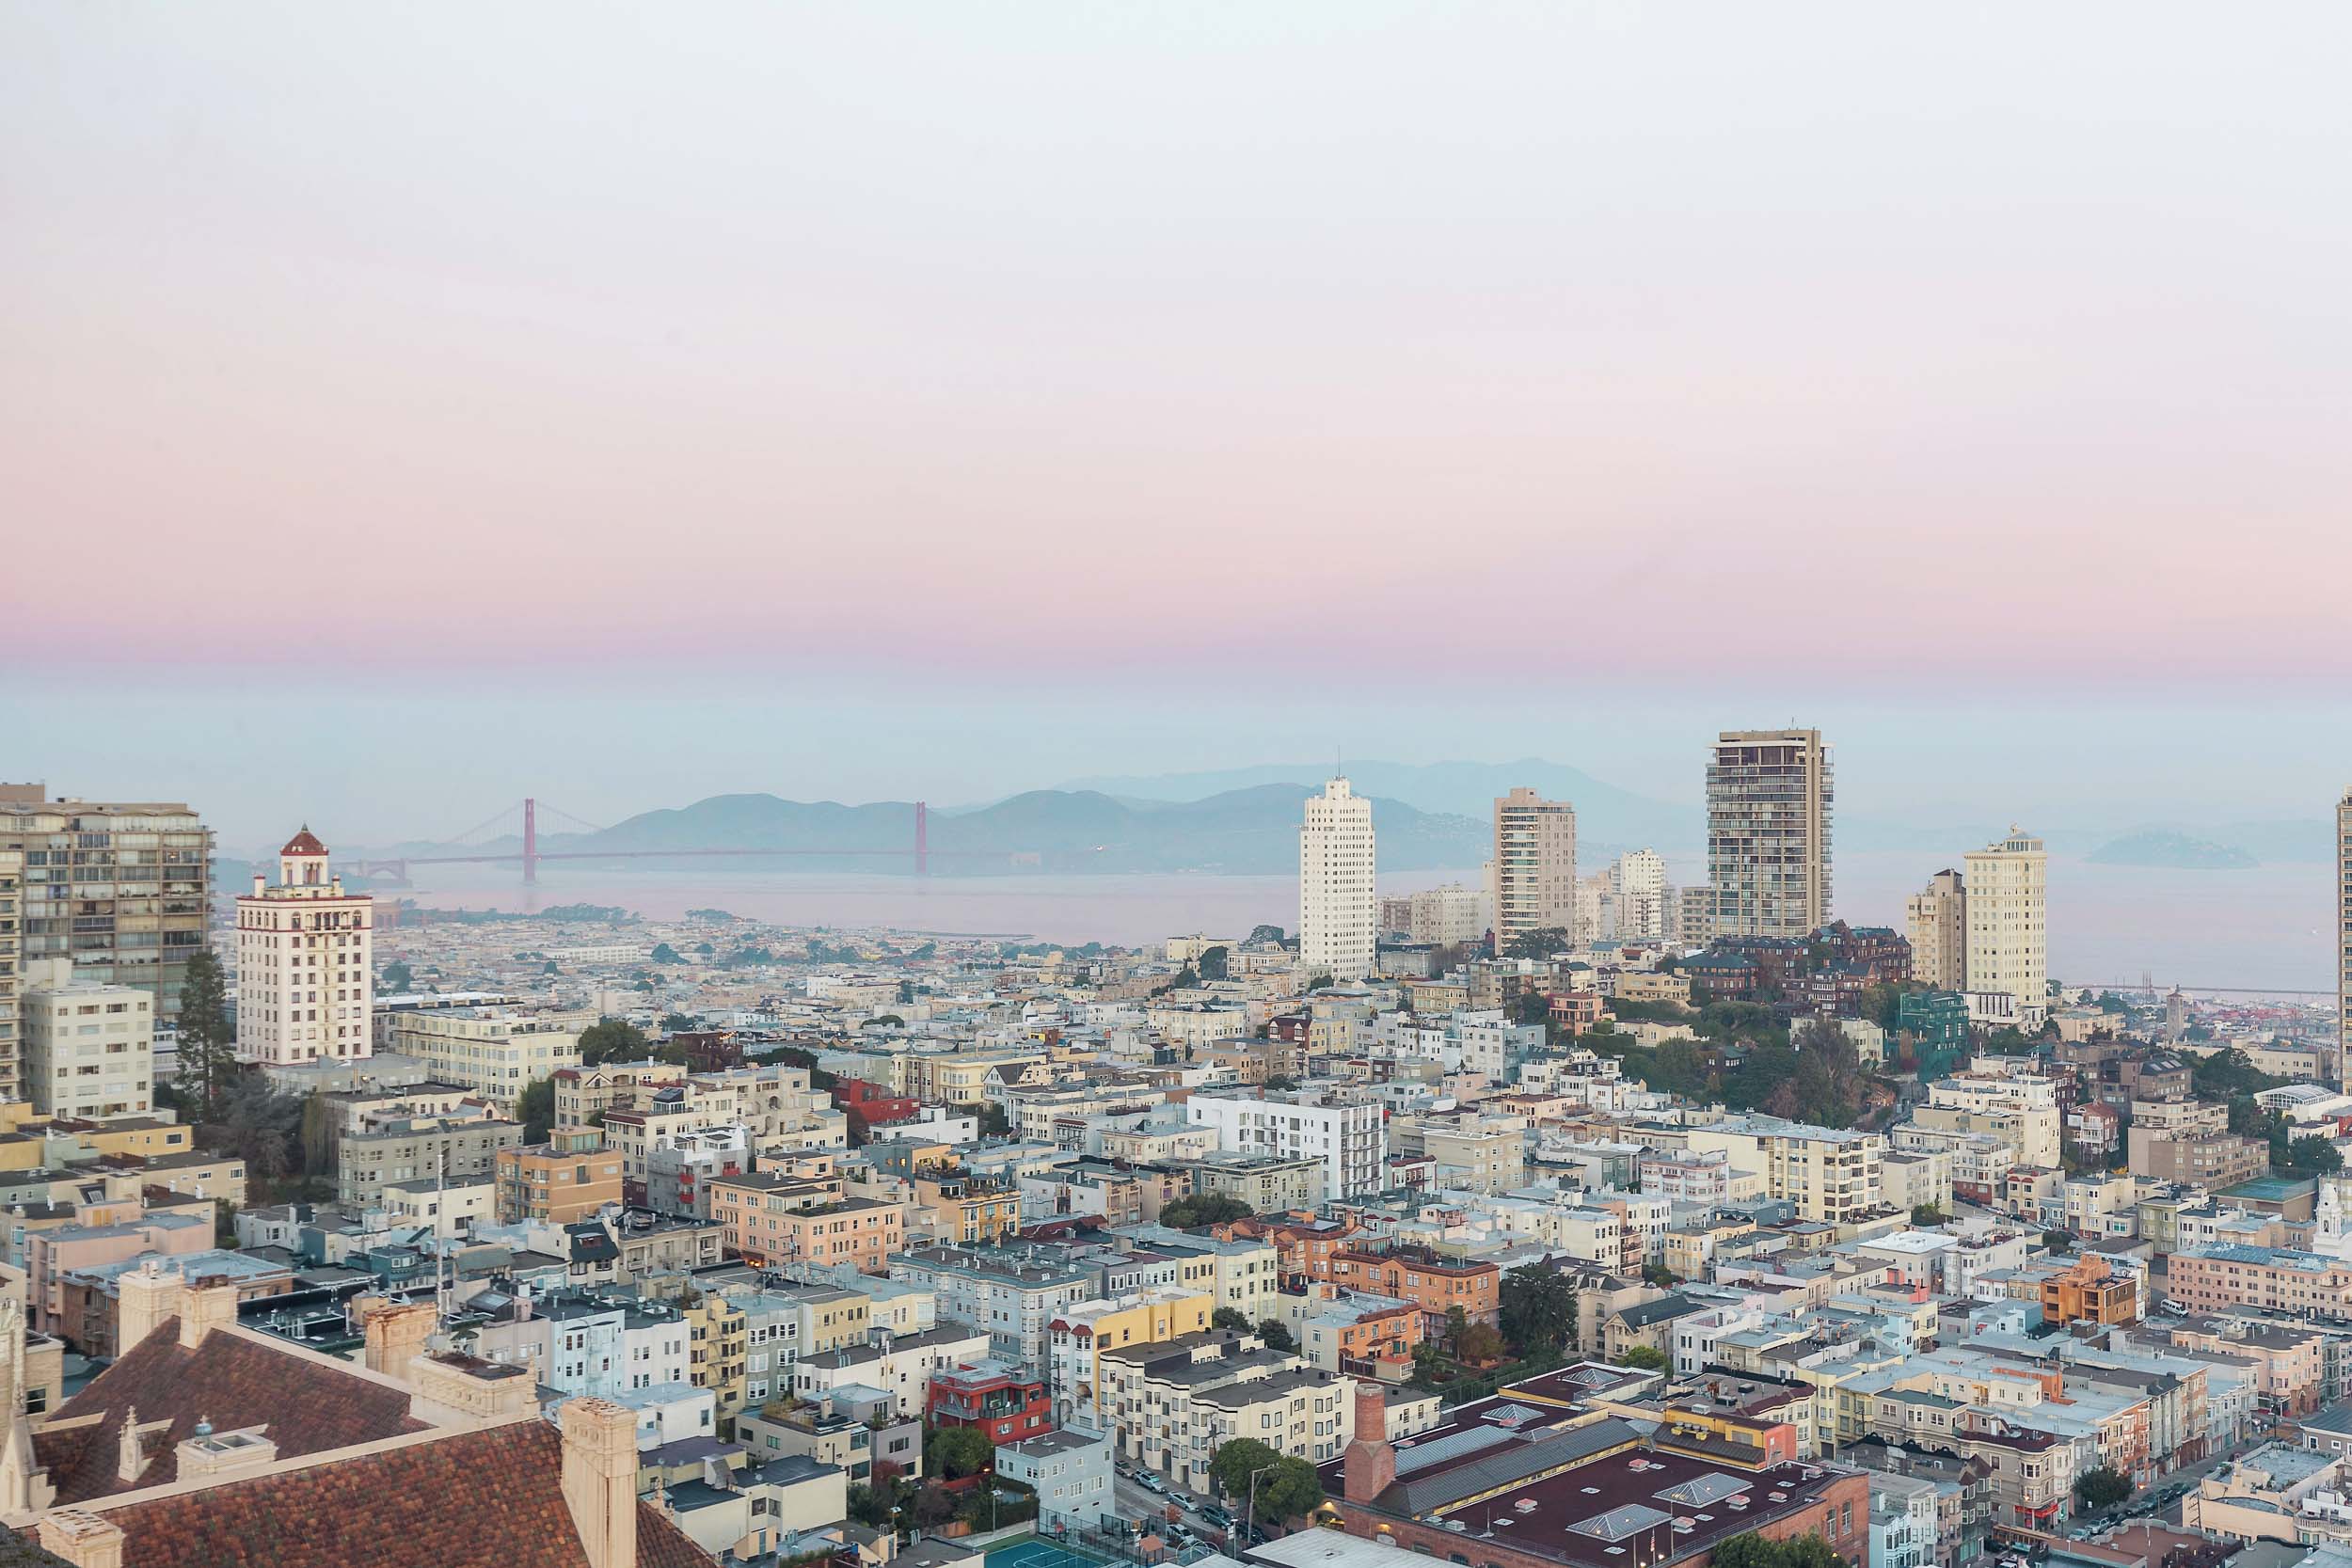 Jaw-dropping 270-degree views of San Francisco from the Fairmont San Francisco